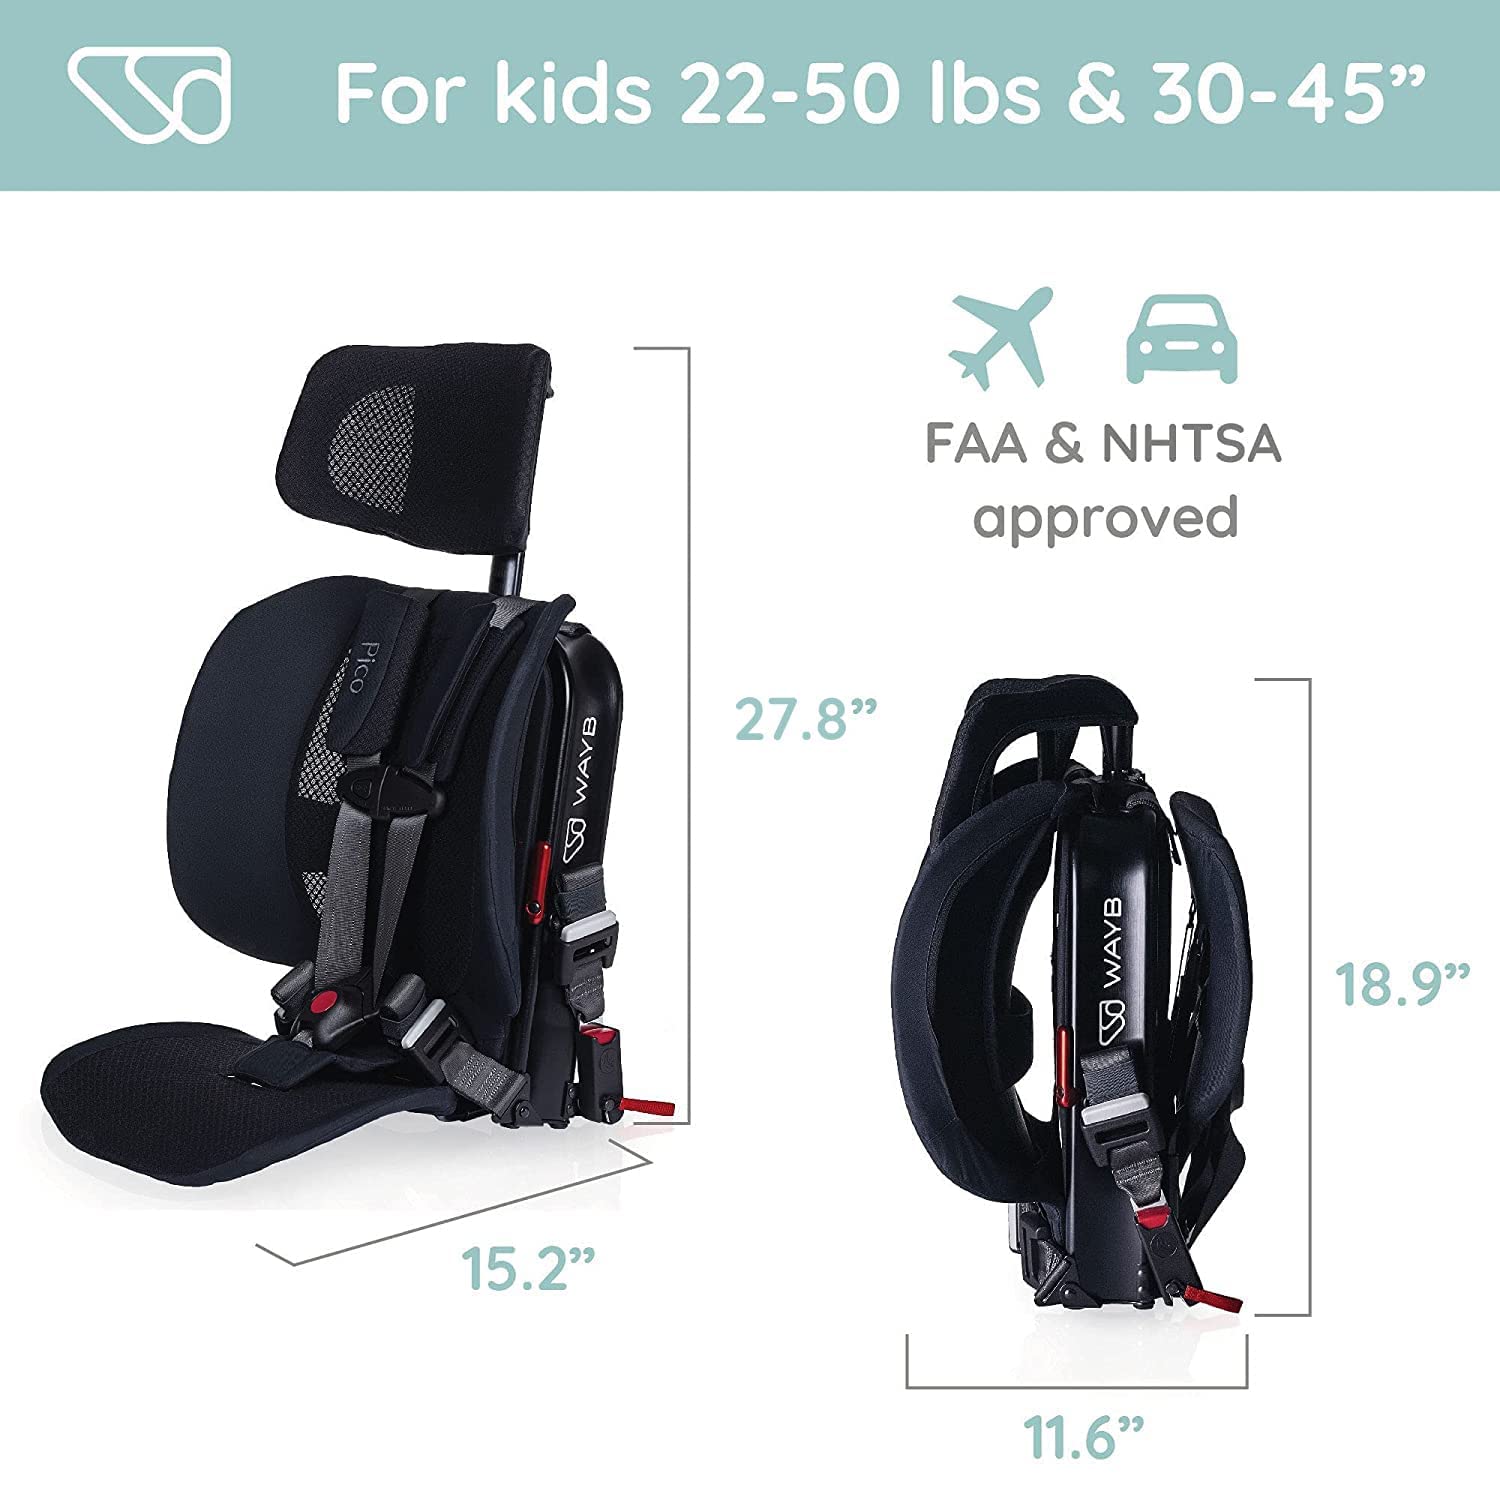 WAYB Pico Travel Car Seat with Premium Carrying Bag- Lightweight, Portable, Foldable - Perfect for Airplanes, Rideshares, and Road Trips - Forward Facing for Kids 22-50 lbs. and 30-45”